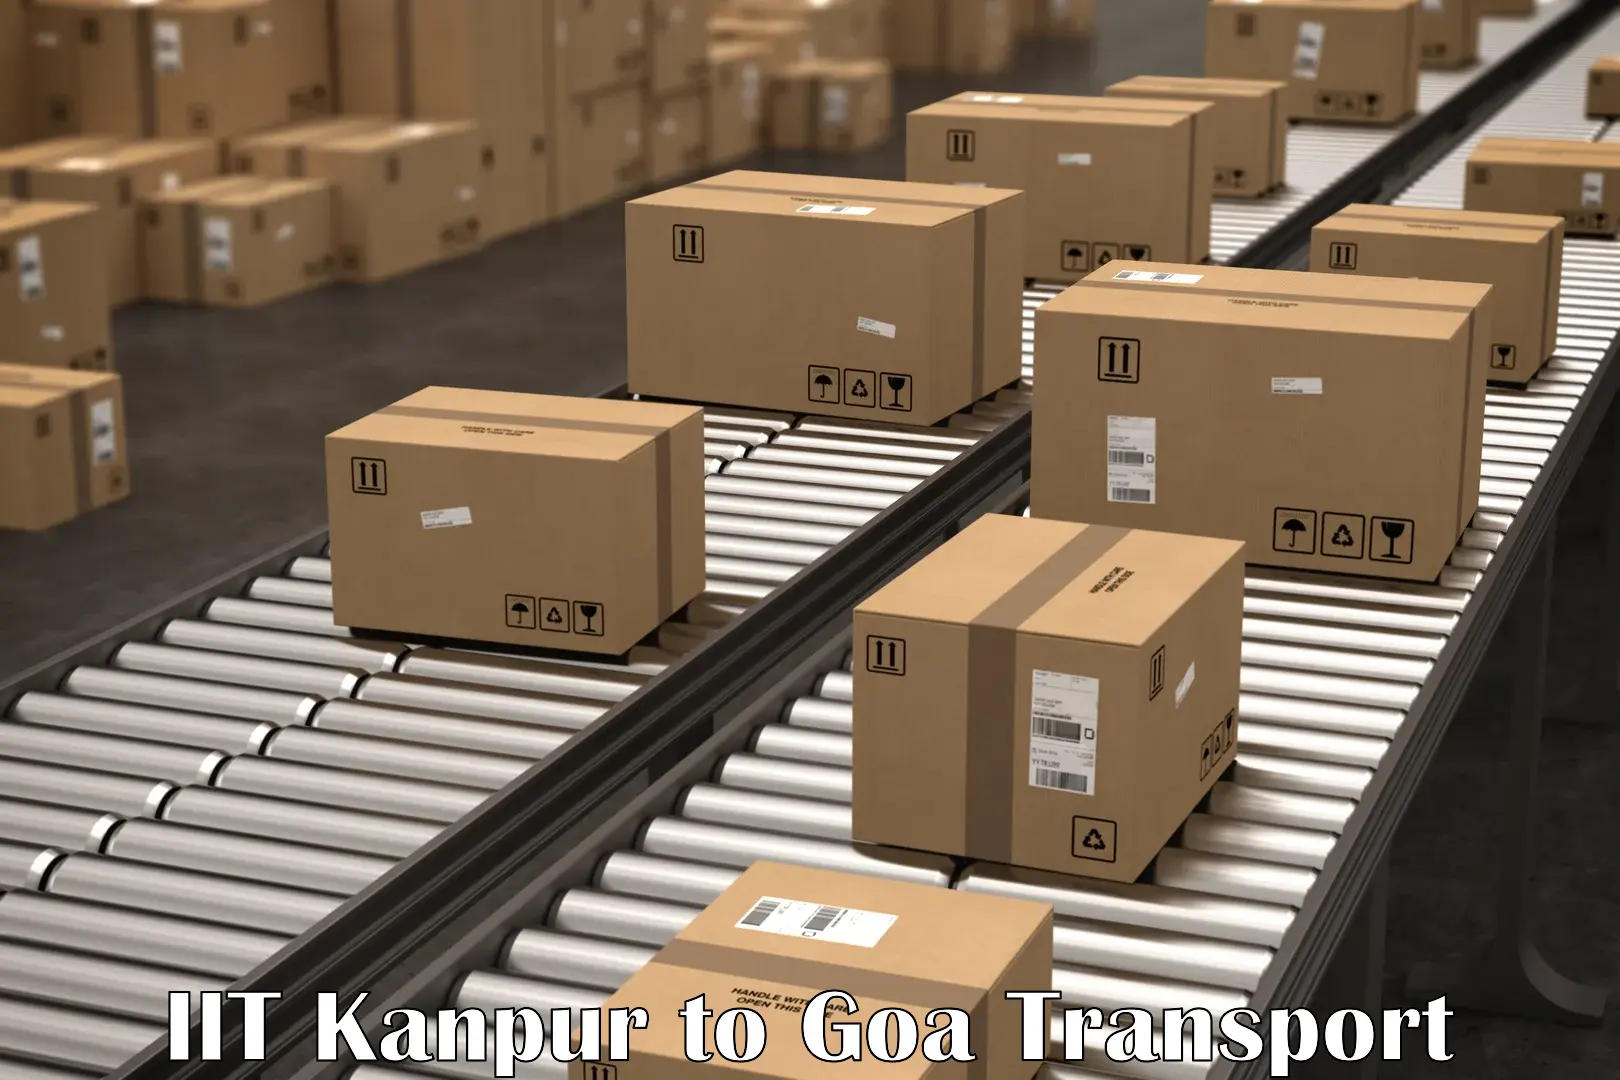 Daily parcel service transport IIT Kanpur to Goa University